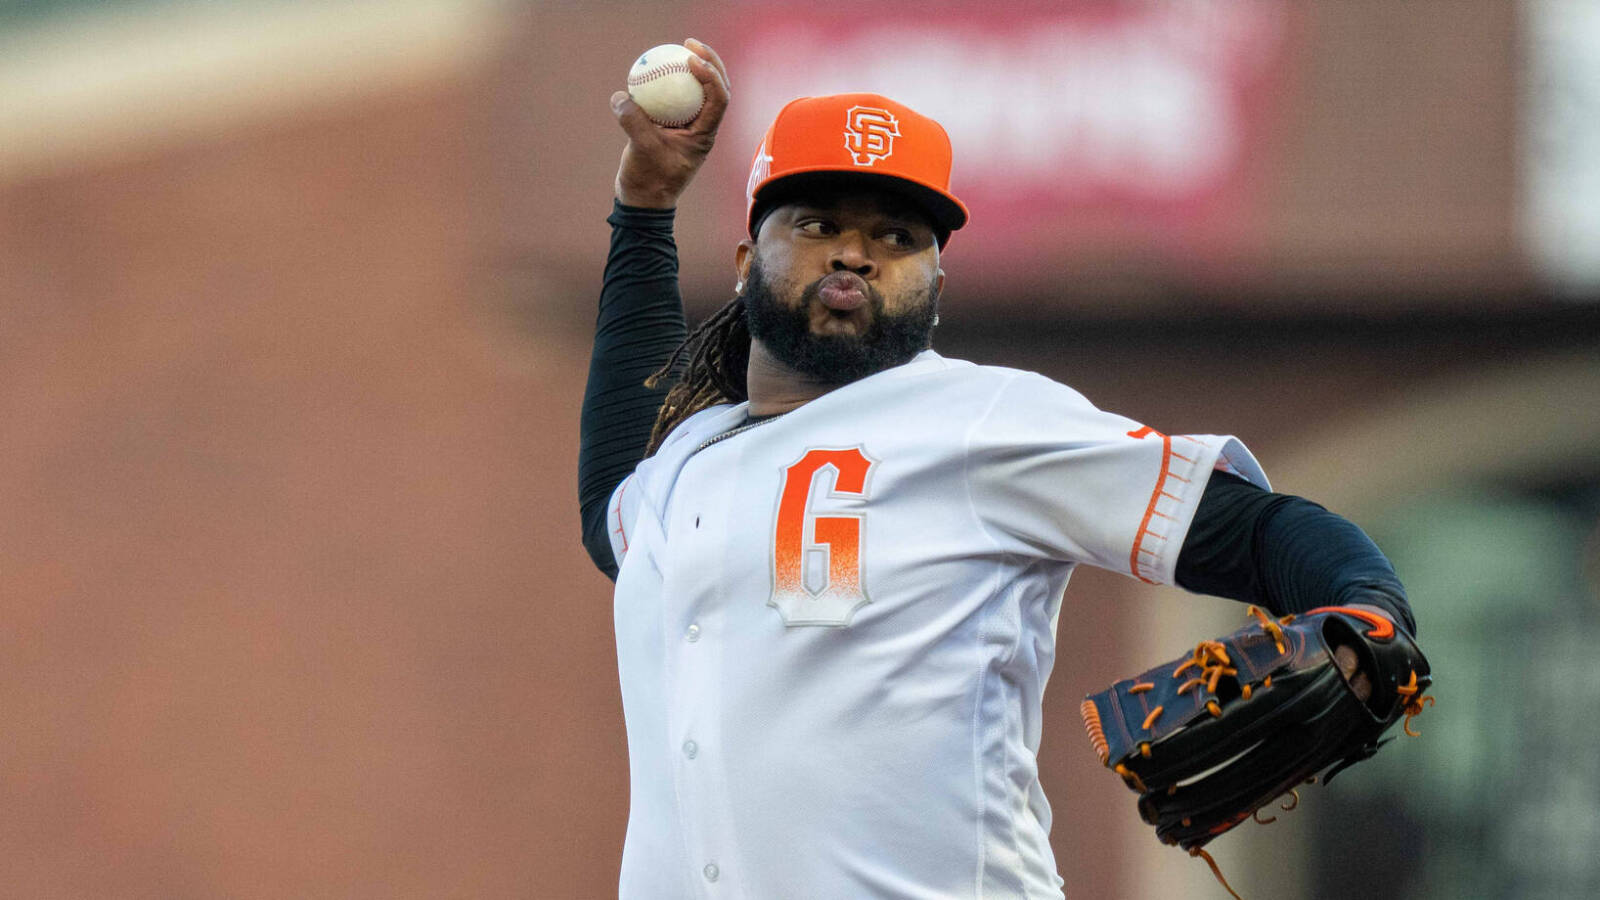 Free-agent righthander Johnny Cueto can still help a rotation